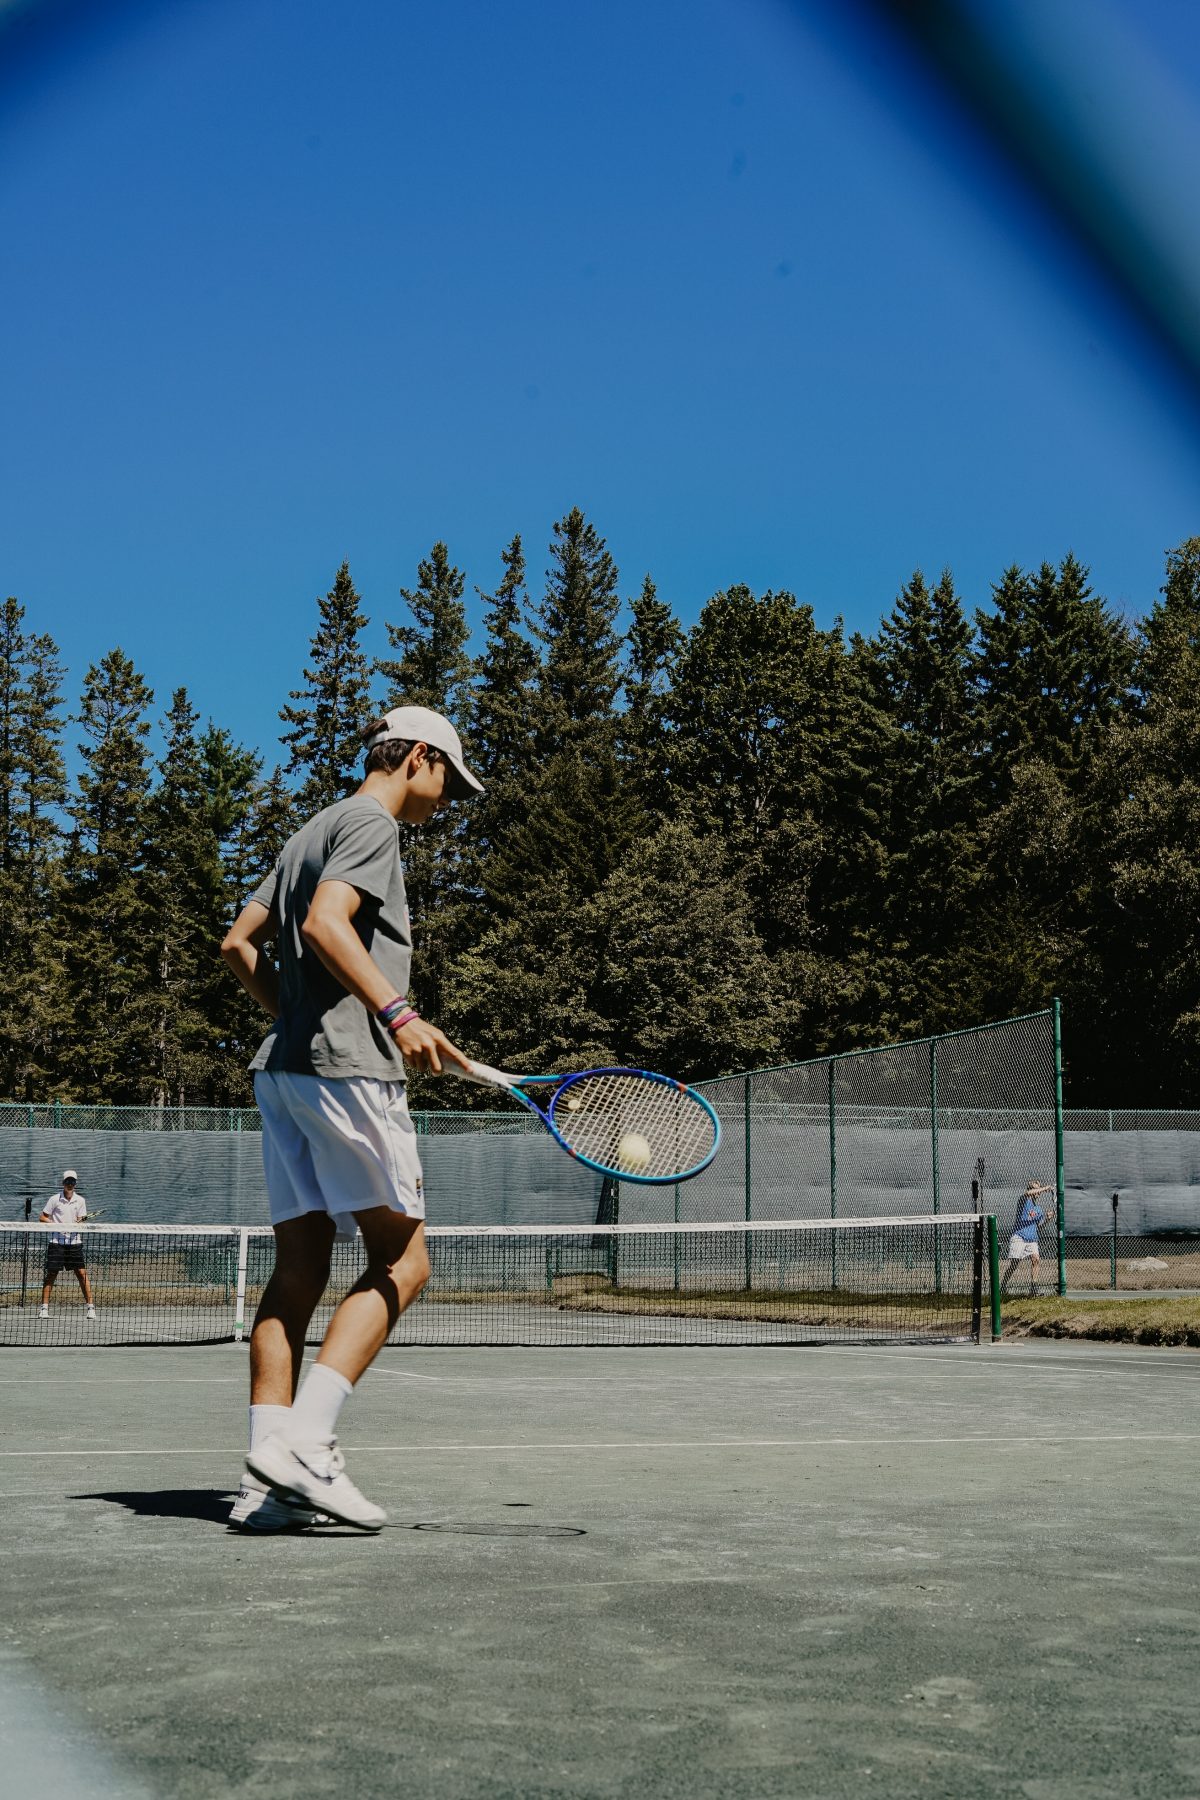 Get in a round of tennis, basketball or bocce or simply hang out at Myrtle Beach, building sandcastles, flying kites and swimming or surfing in the Atlantic